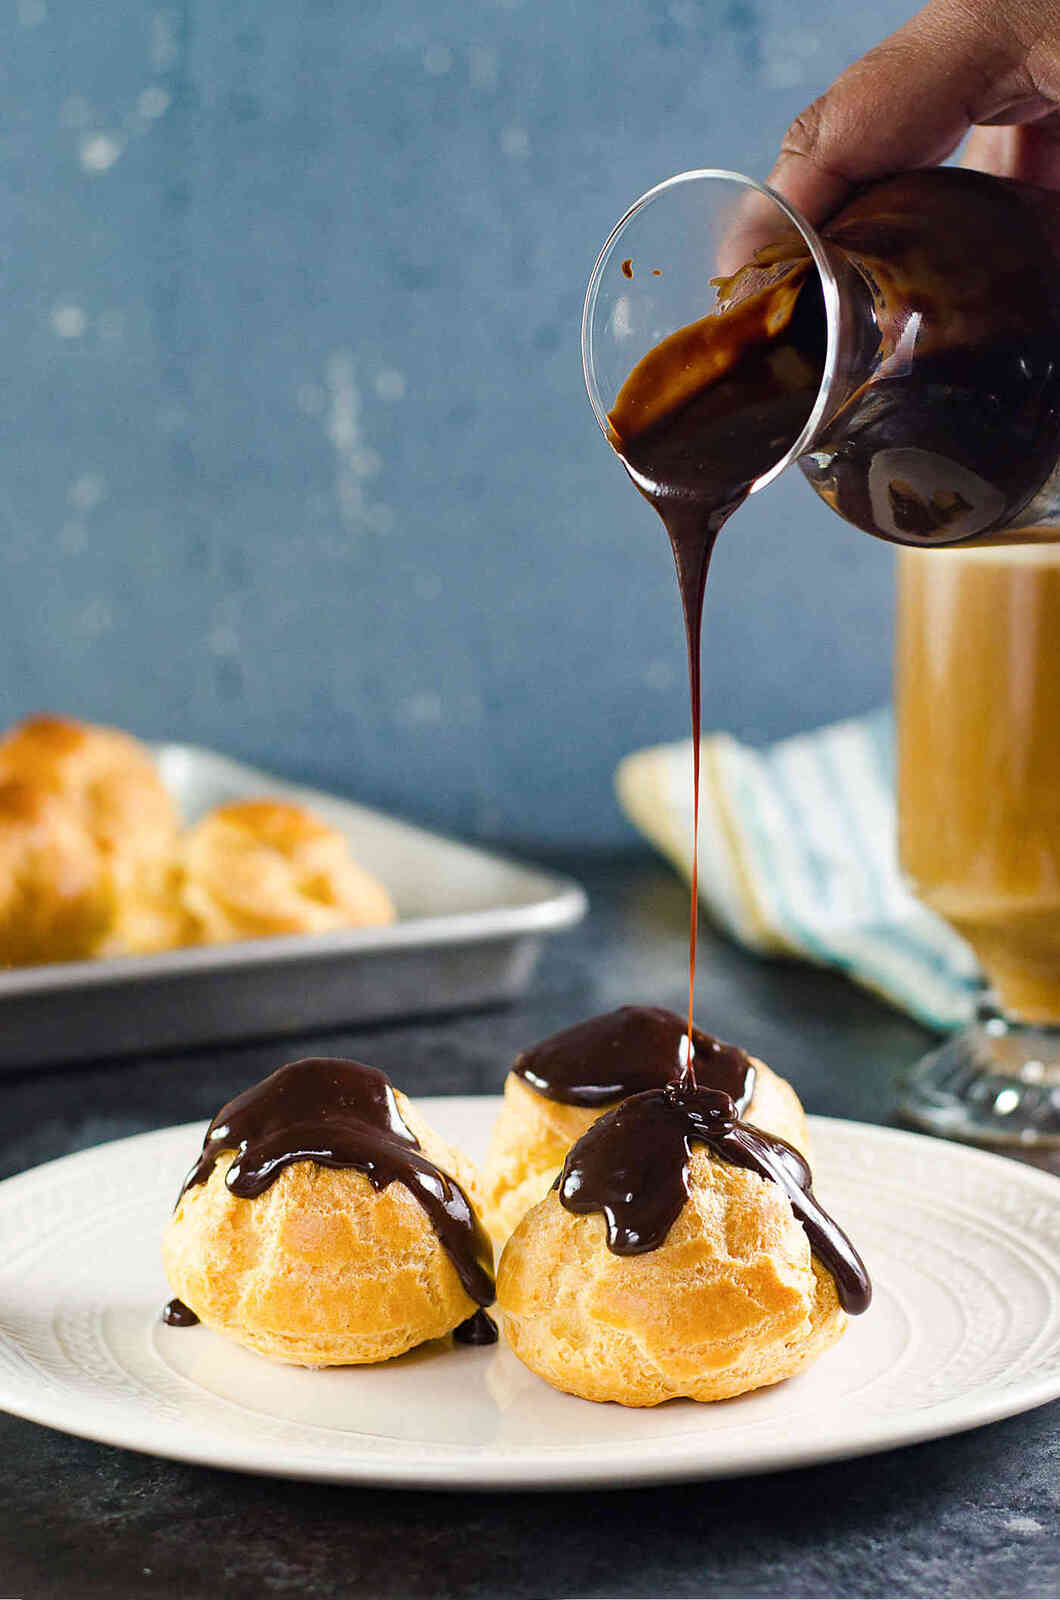 Chocolate Profiteroles with Pastry Cream (Cream Puffs) - rich, creamy custard filling inside light, airy, crispy, perfectly baked choux pastry shells, and then drizzled with a luscious chocolate sauce on top. 